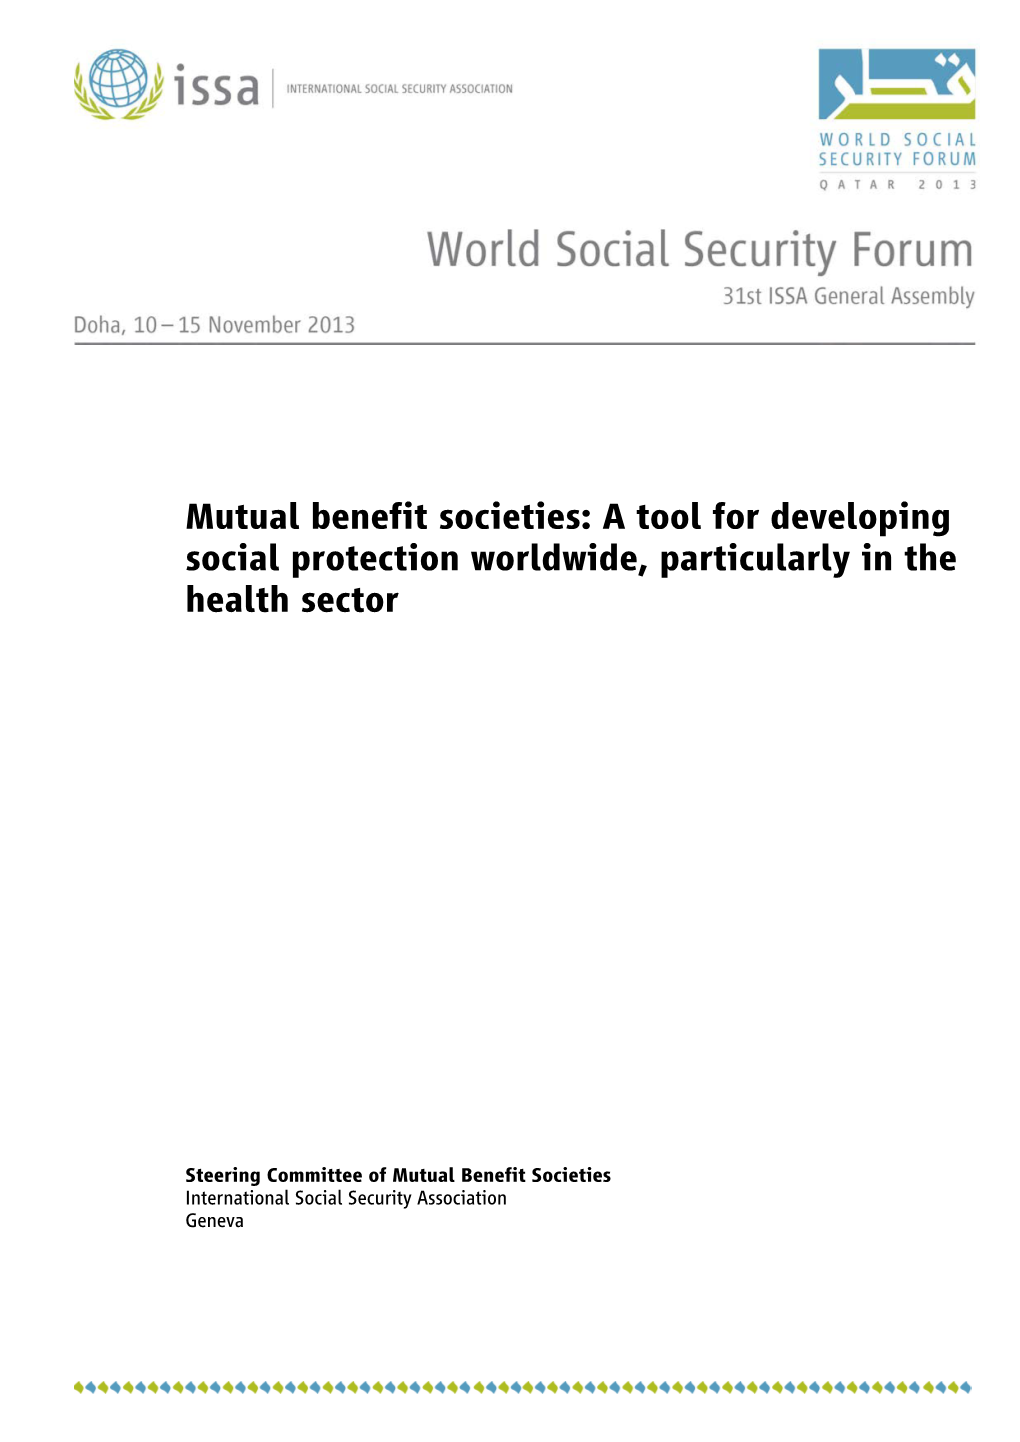 Mutual Benefit Societies: a Tool for Developing Social Protection Worldwide, Particularly in the Health Sector